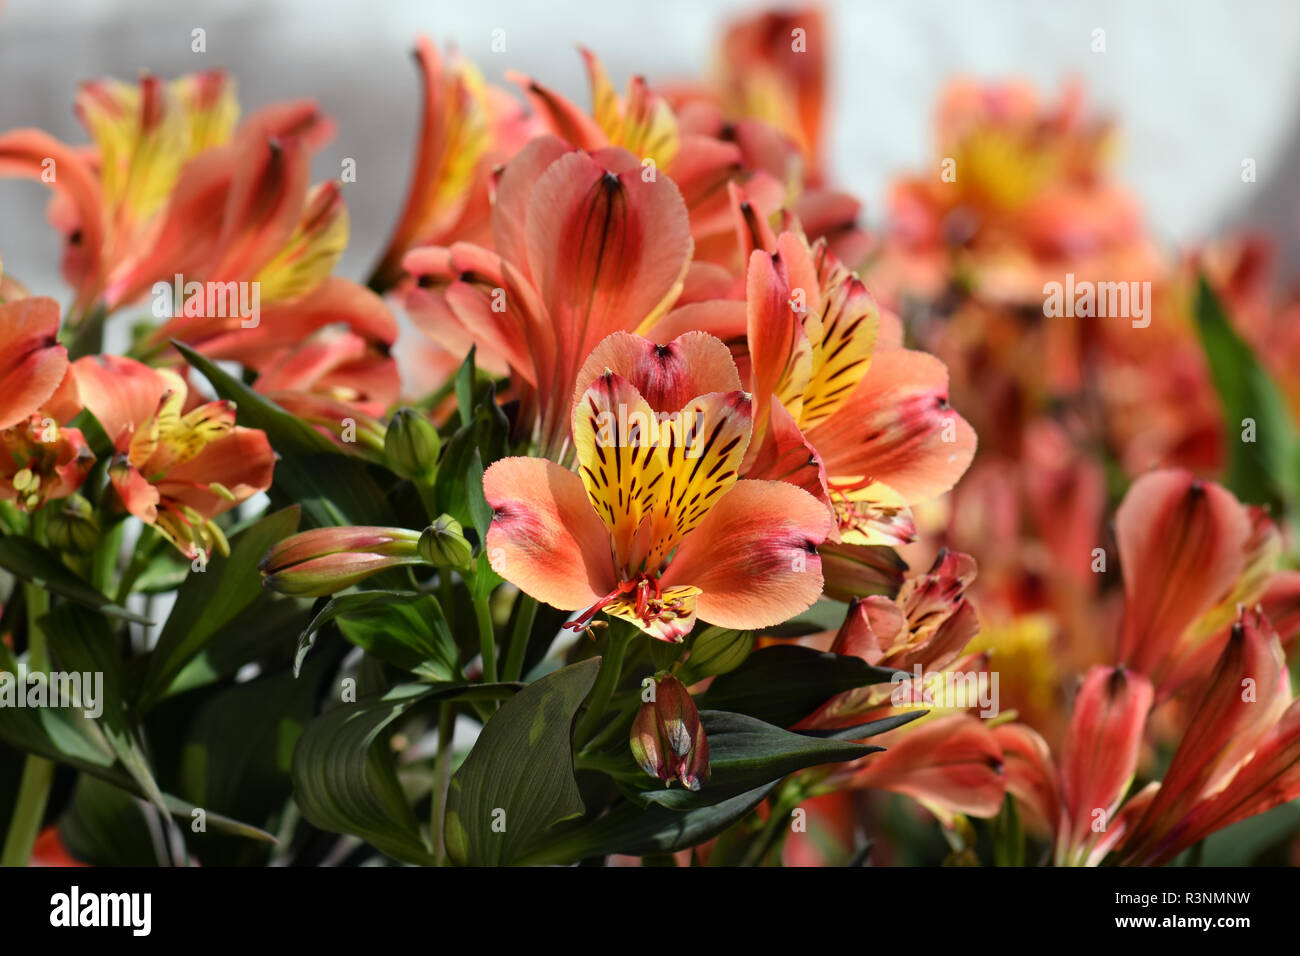 Alstroemeria peruvian lily flowering plant in bloom. Springtime nature background. Stock Photo